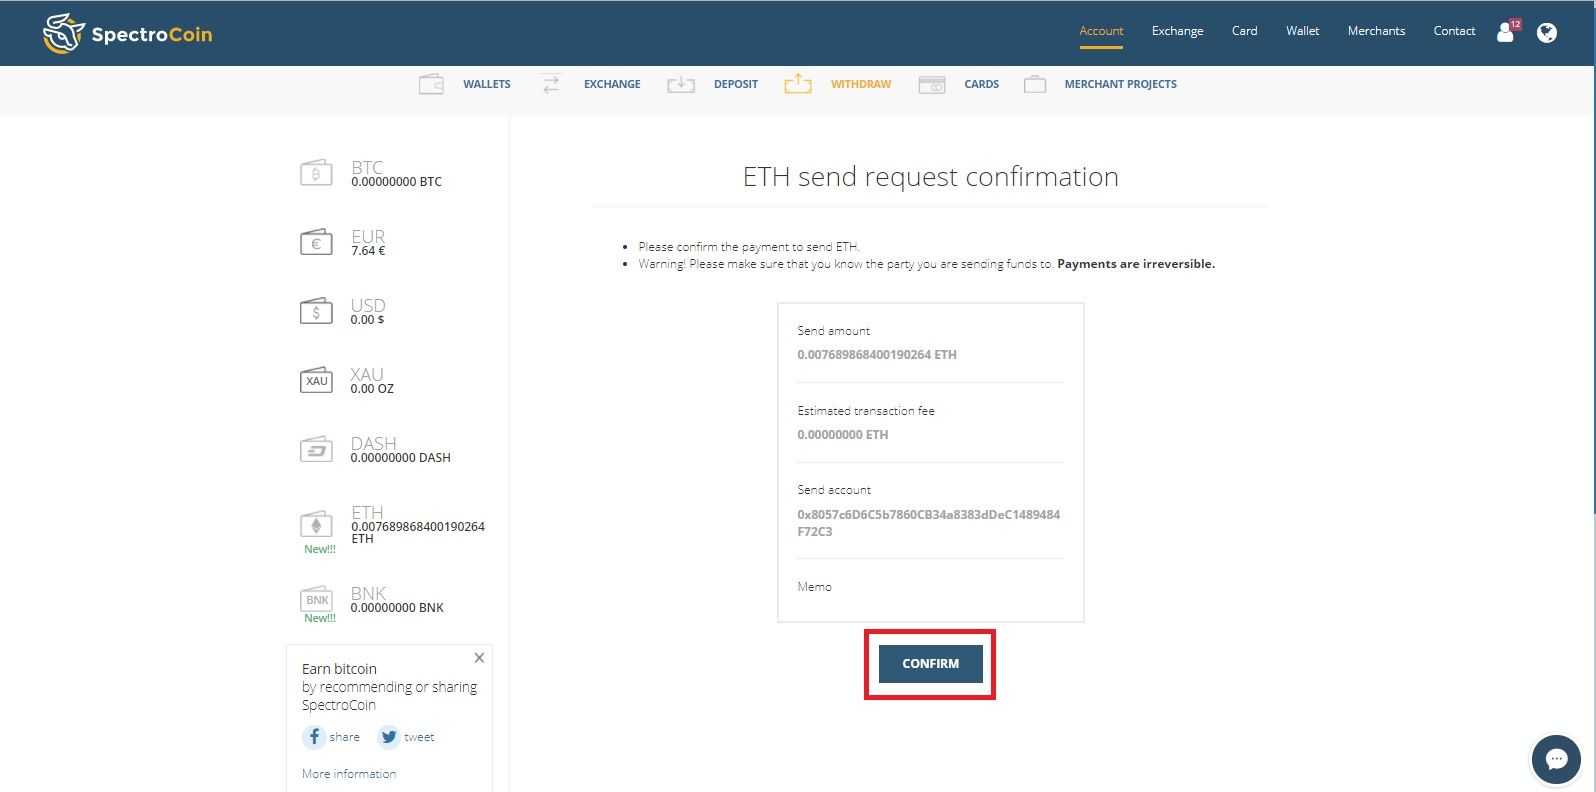 SpectroCoin ETH send request confirmation page with highlighted "confirm" option